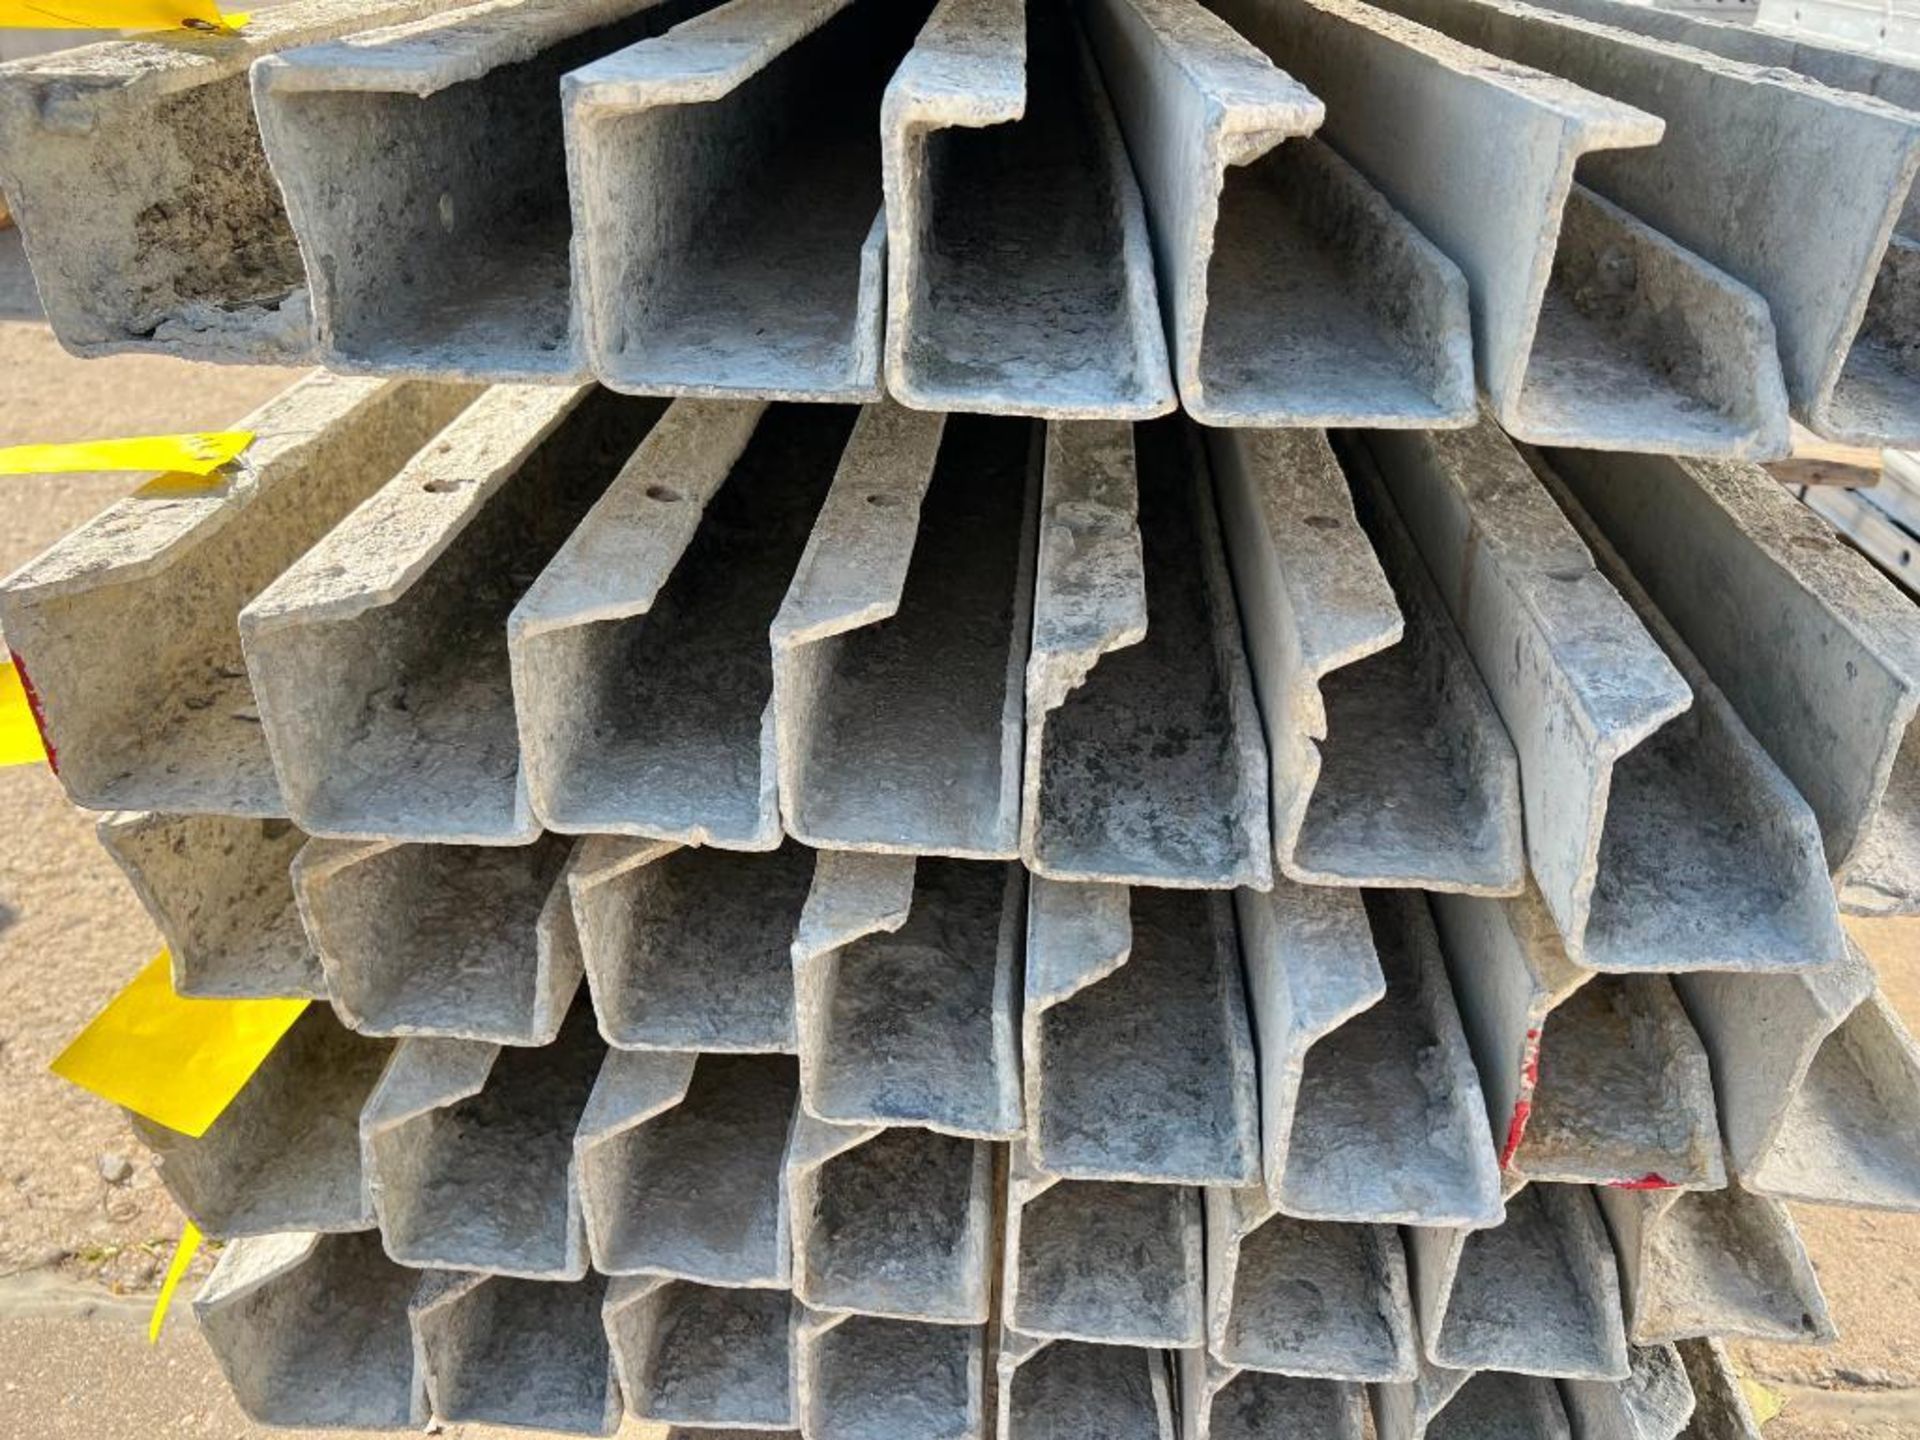 (8) 4" x 4' x 9' Nominal Wall Smooth Ties Aluminum Concrete Forms, 6-12 Hole Pattern. Located in Mt.